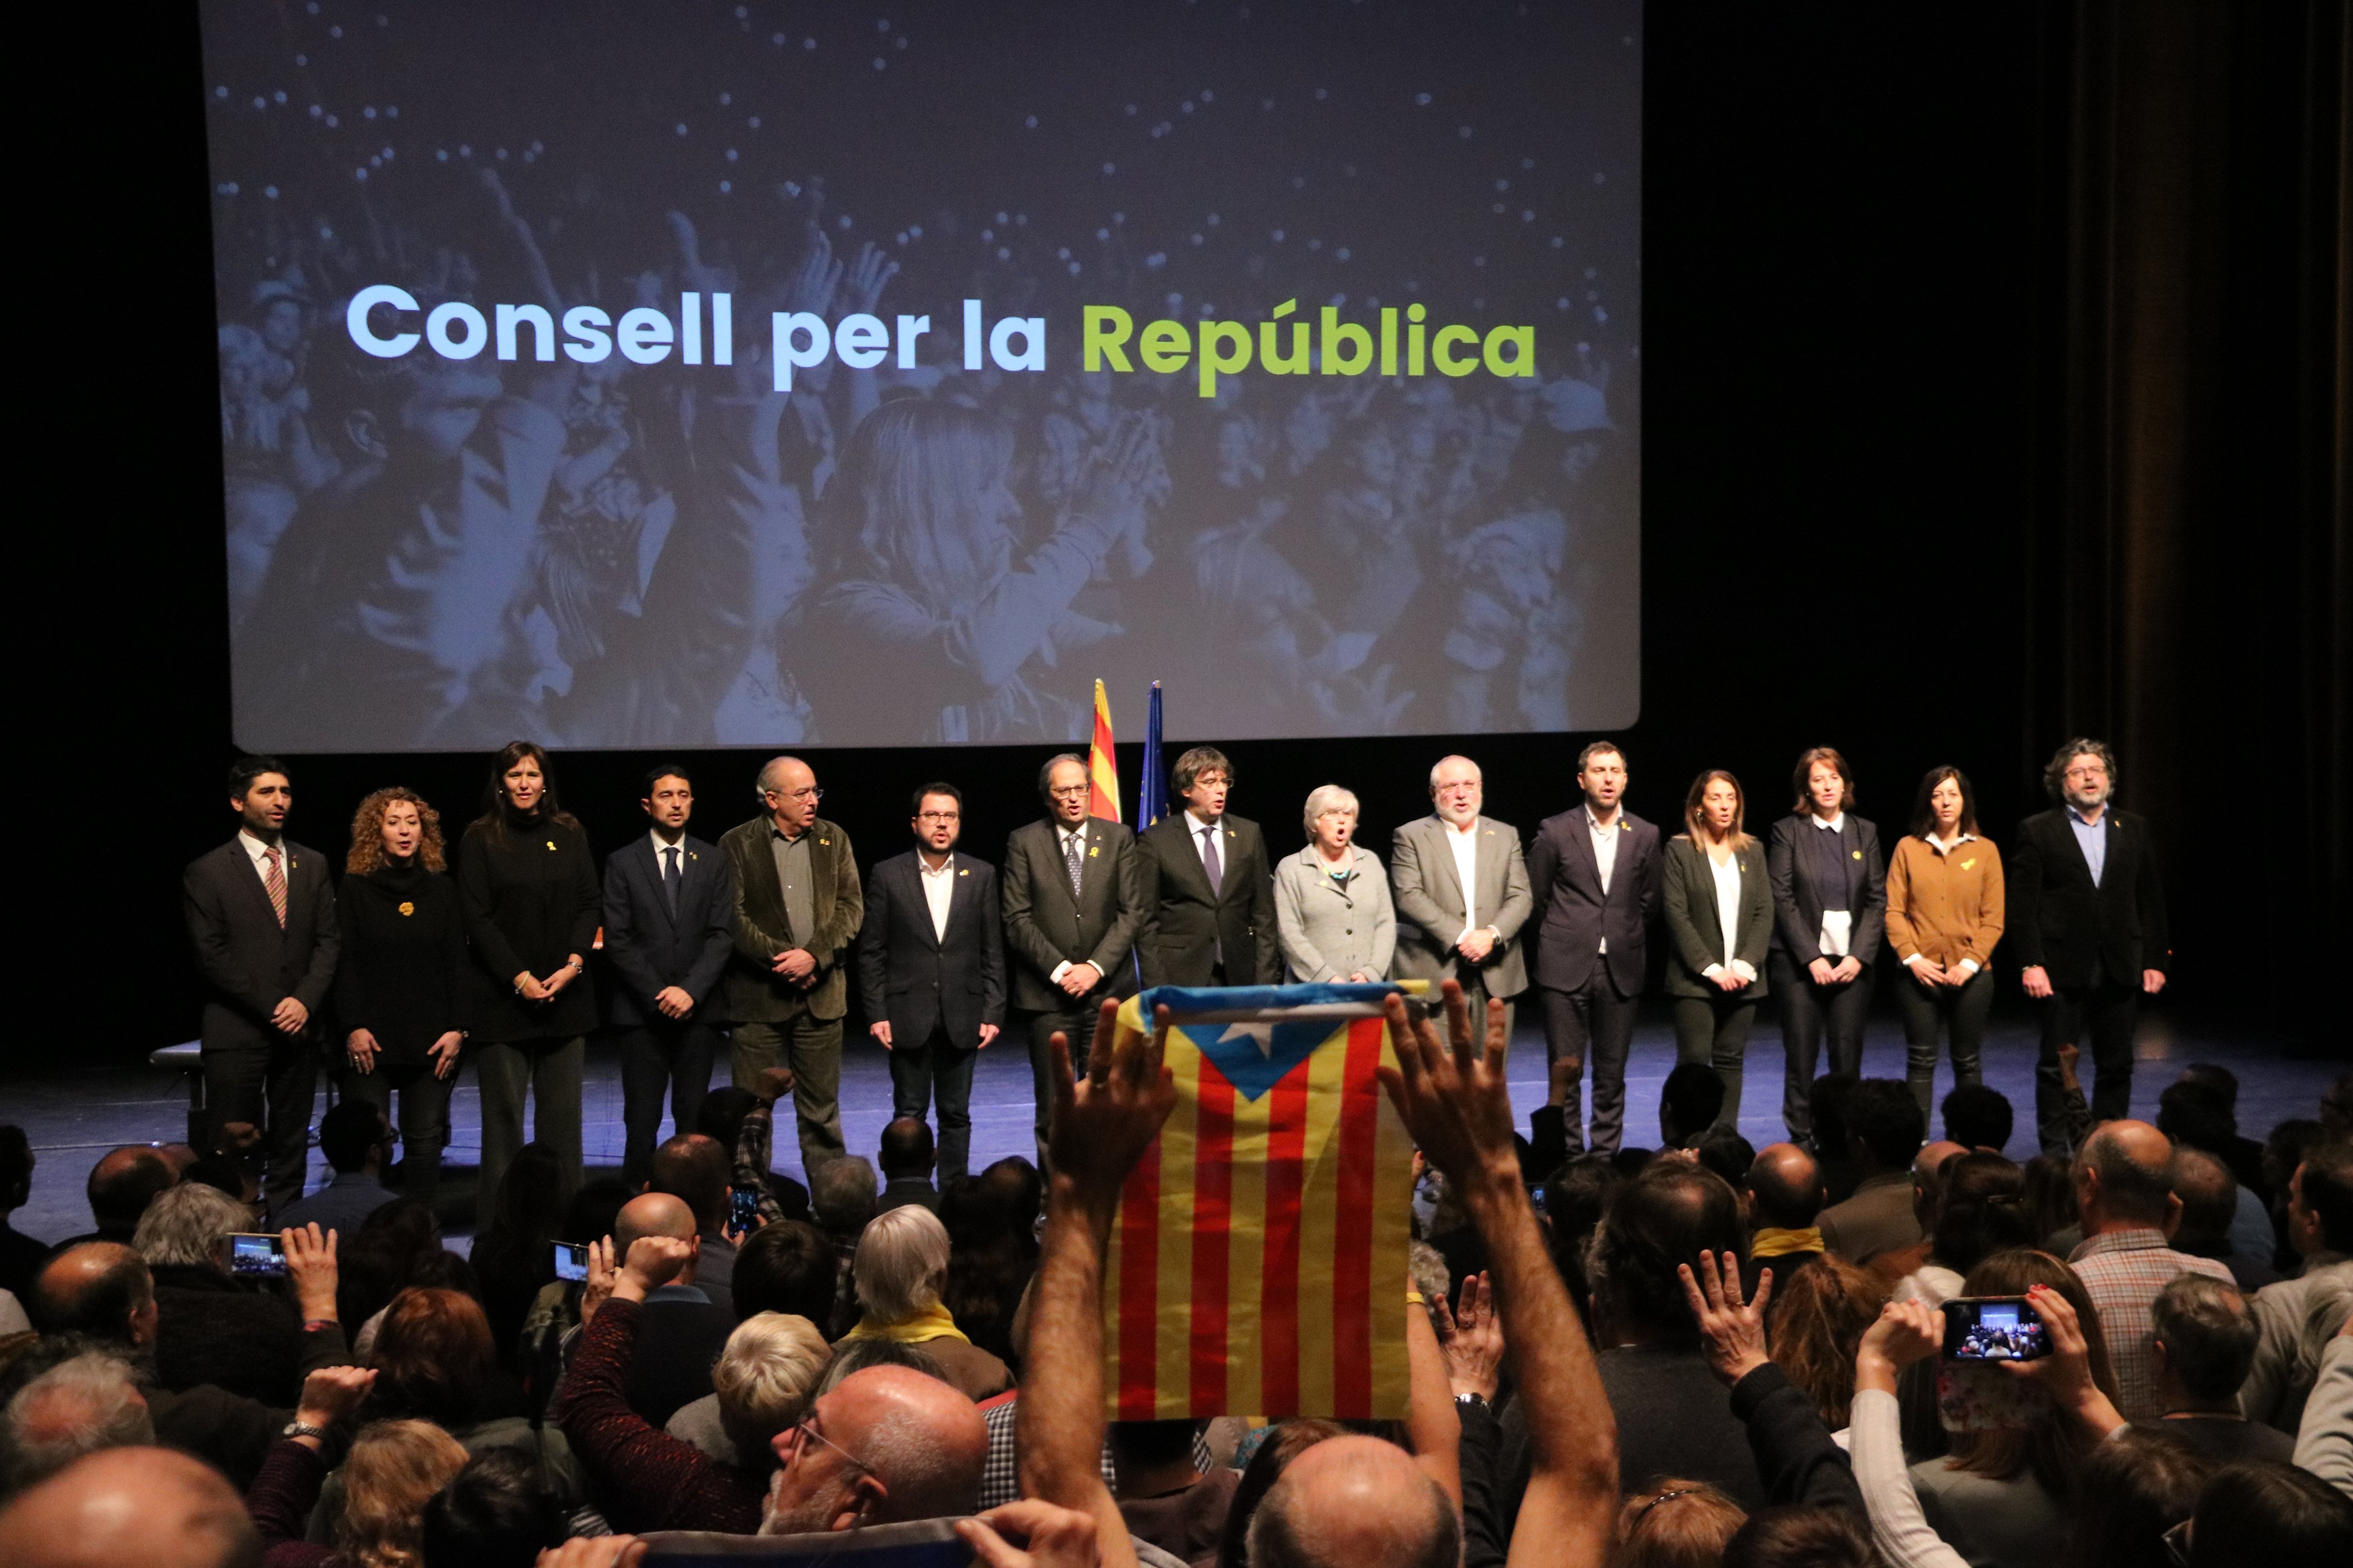 Over 5,000 sign up in a single day for Catalan exile body Council for the Republic